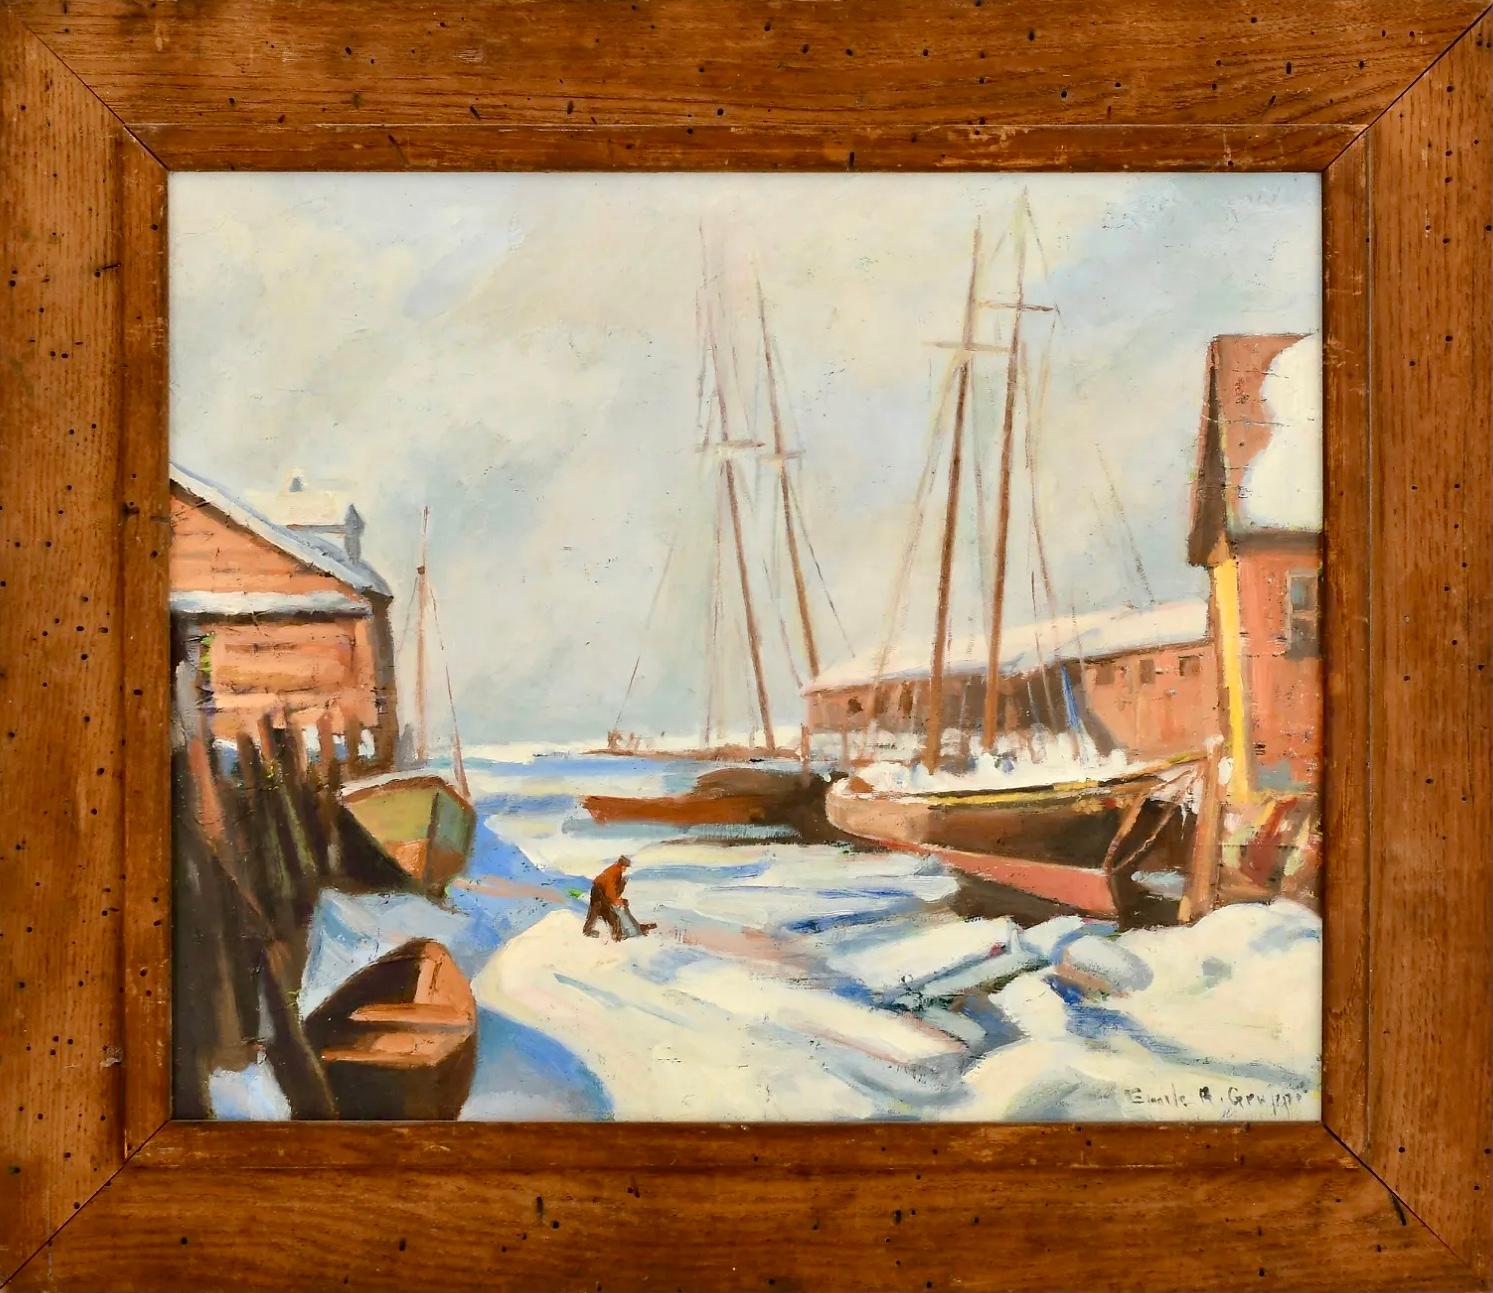 Emile Albert Gruppe (American, 1896-1978)
"Winter - Gloucester, Mass"
Oil on canvas
Signed "Emile A. Gruppe" (lower right)
Canvas: 20 x 24 Inchesinches
Framed: 27 x 31 inches 

Provenance: The Ron Anderson Collection, Litchfield,